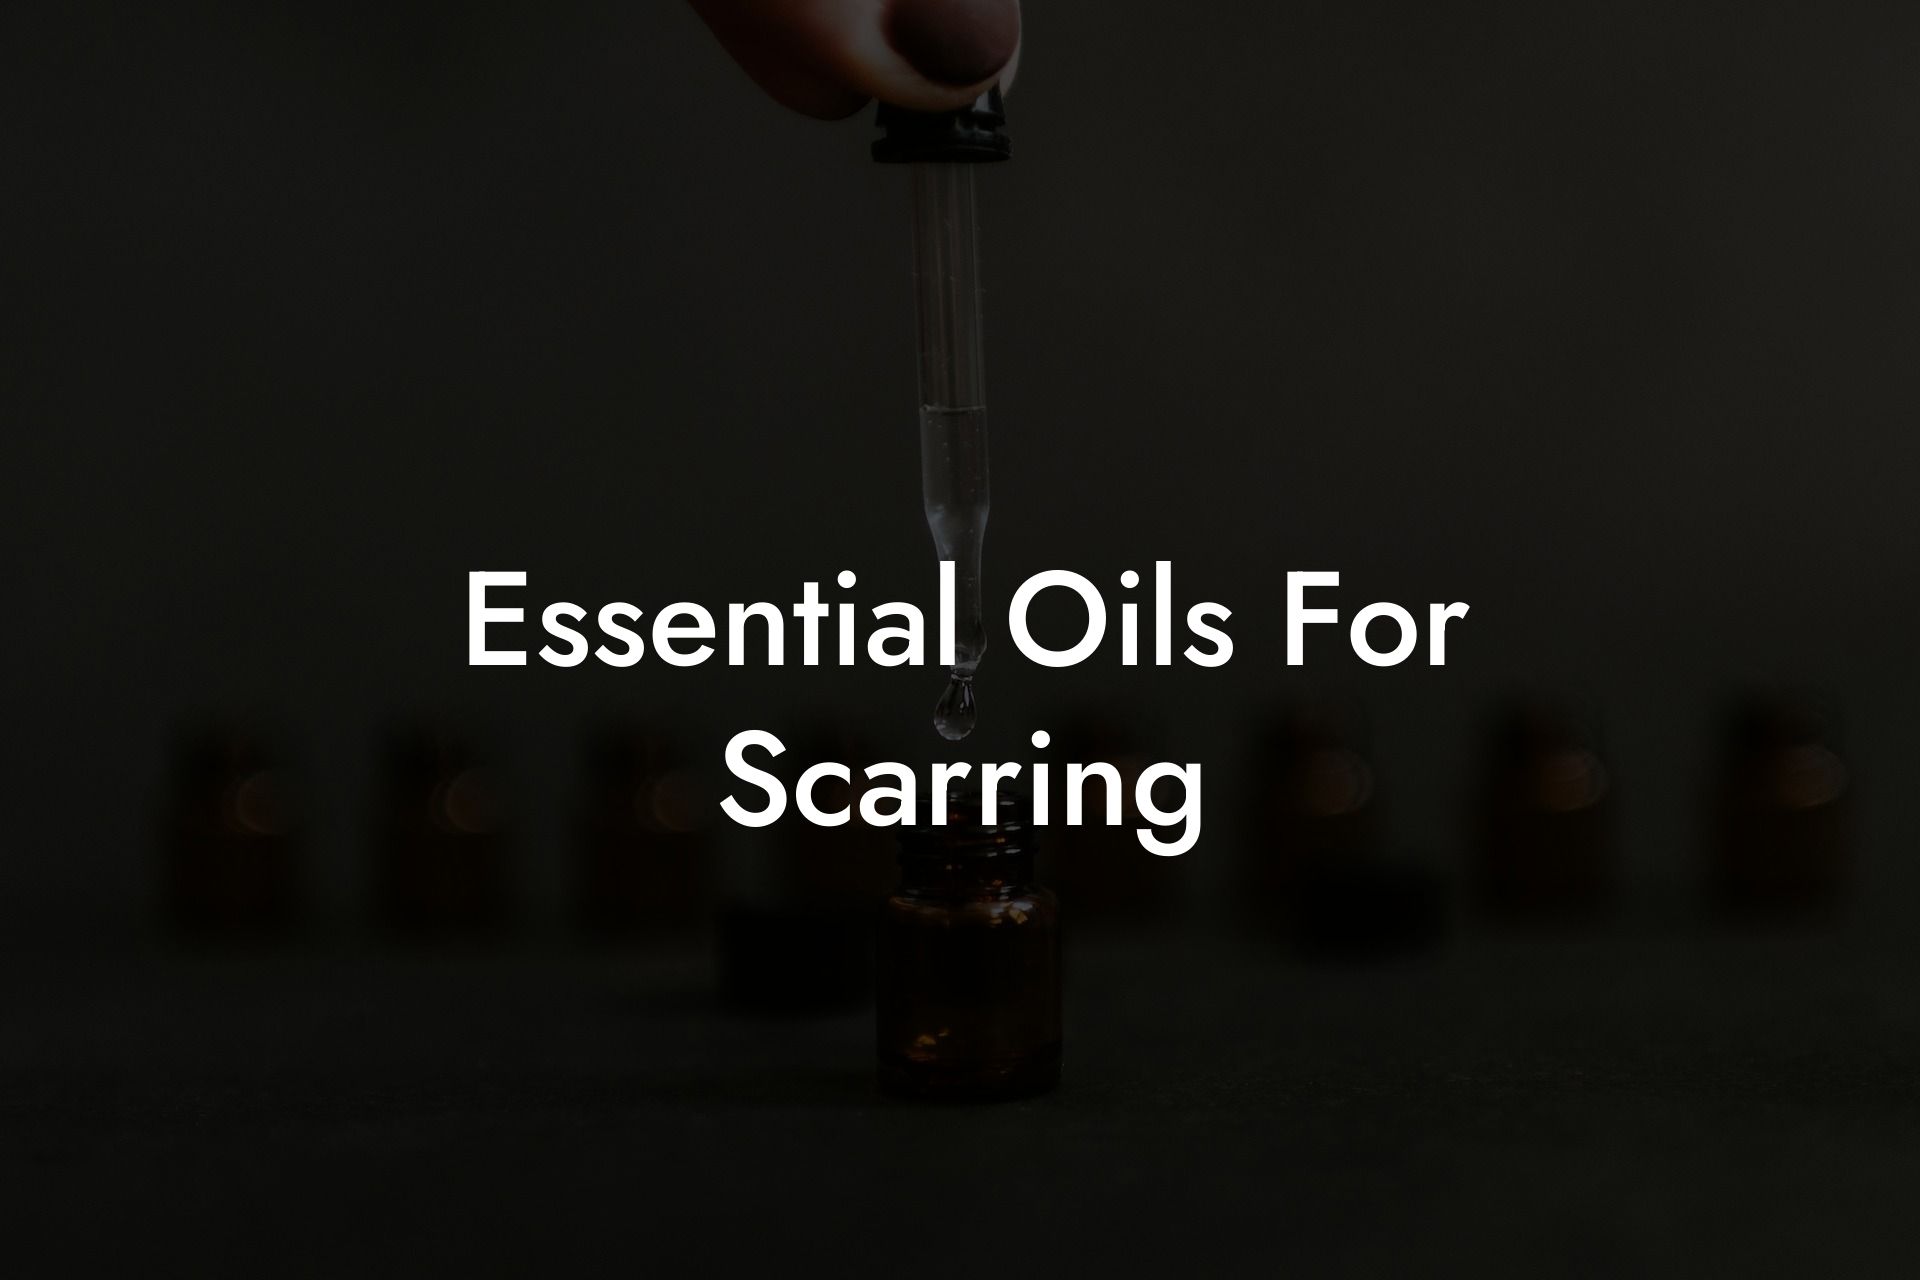 Essential Oils For Scarring